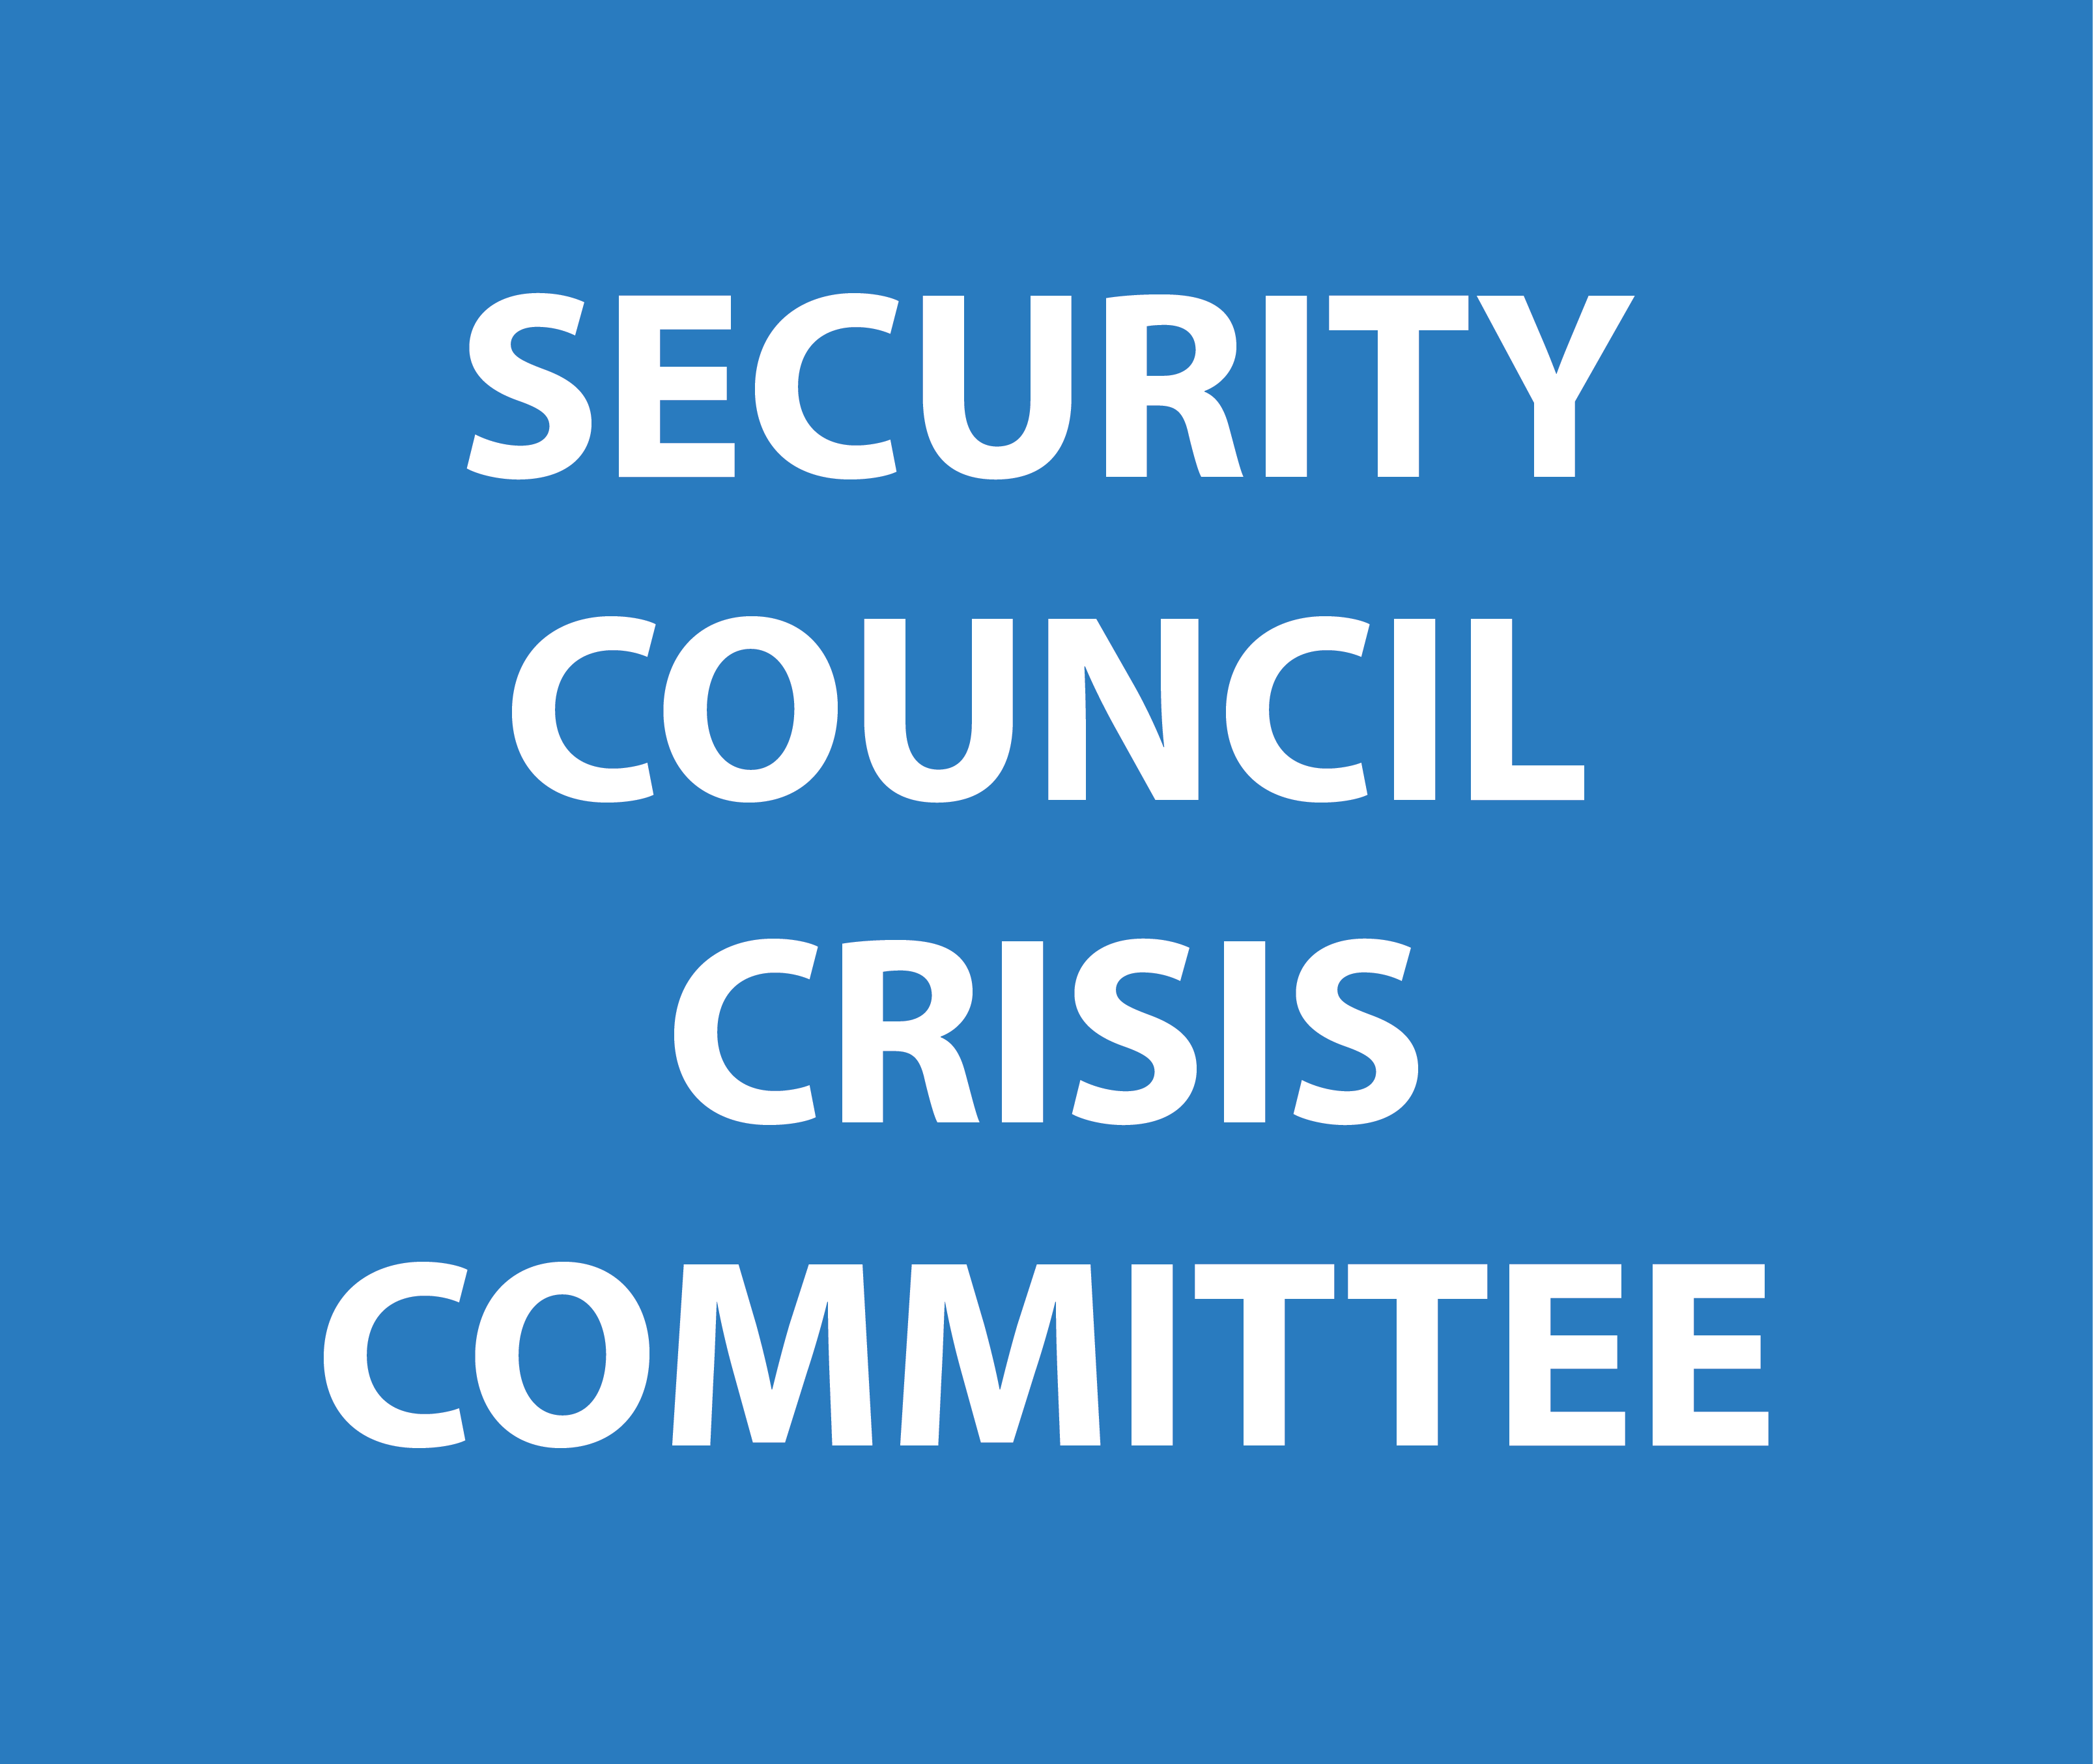 Security council crisis committee